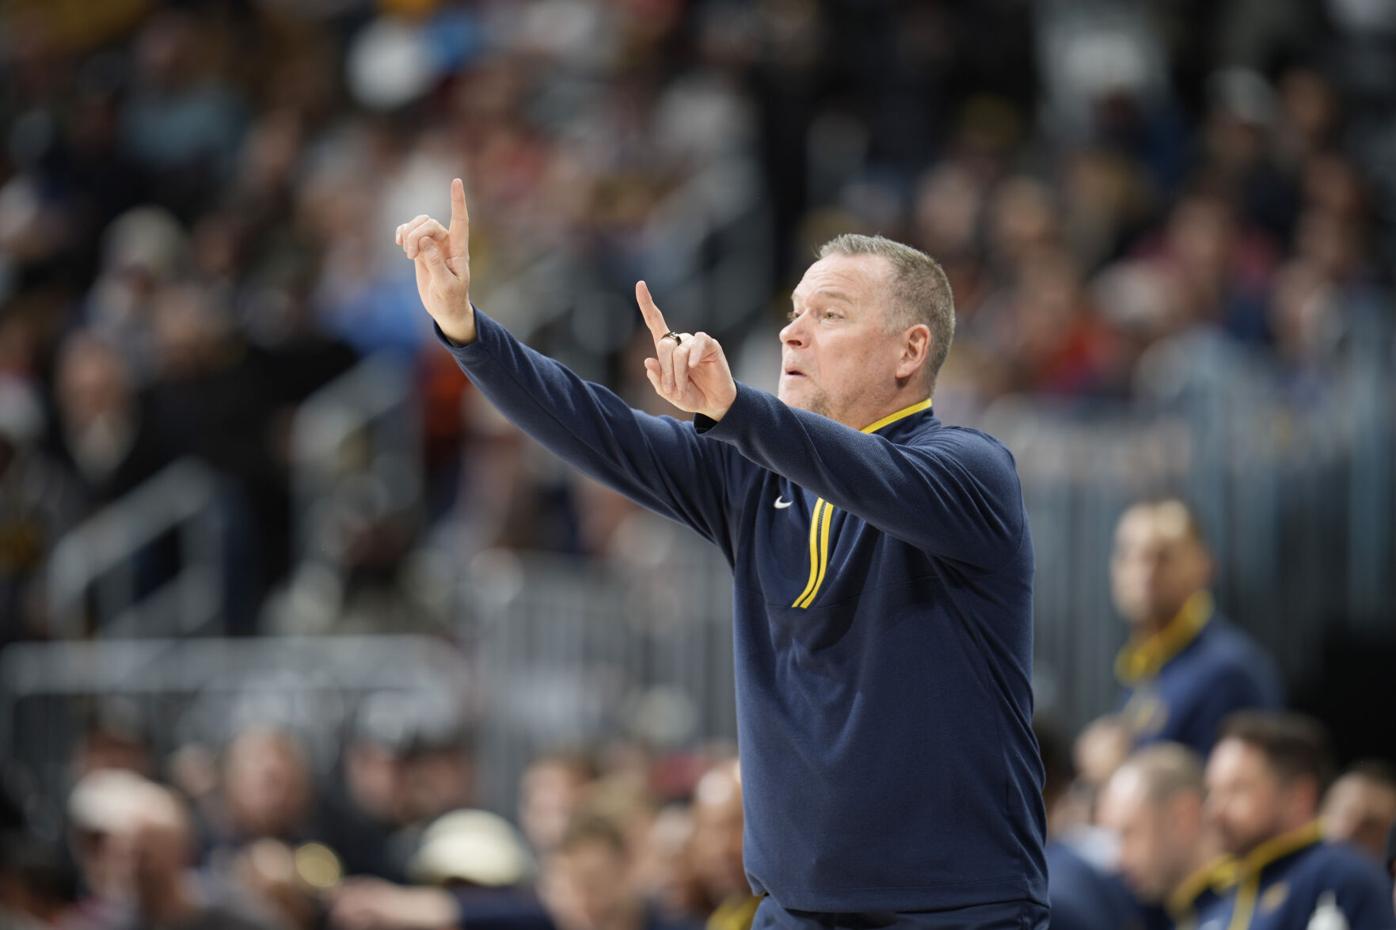 Denver Nuggets coach Michael Malone completes stunning journey to